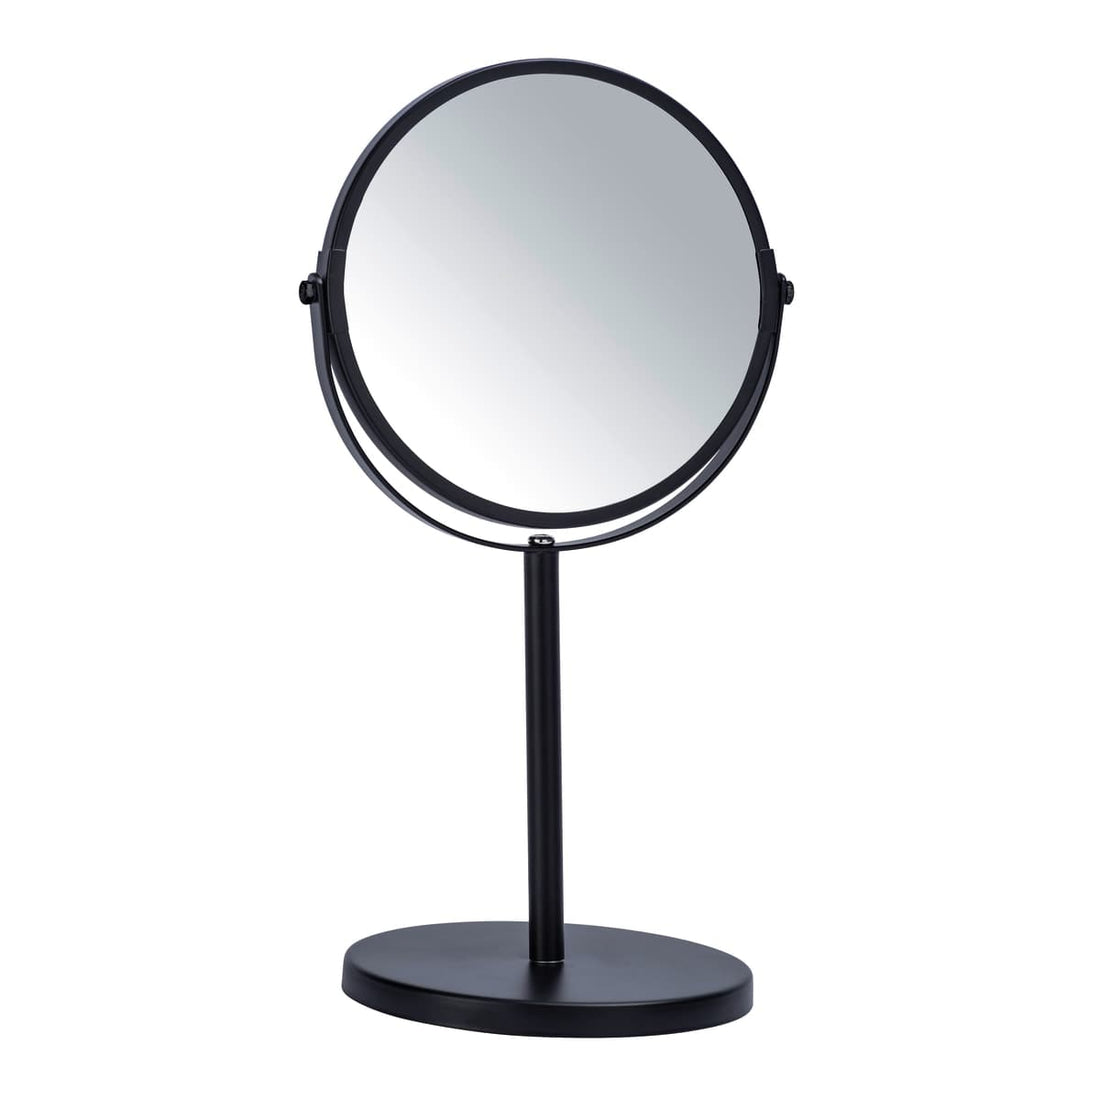 BLACK STAND-UP MAGNIFYING MIRROR ASSISI - best price from Maltashopper.com BR430007777